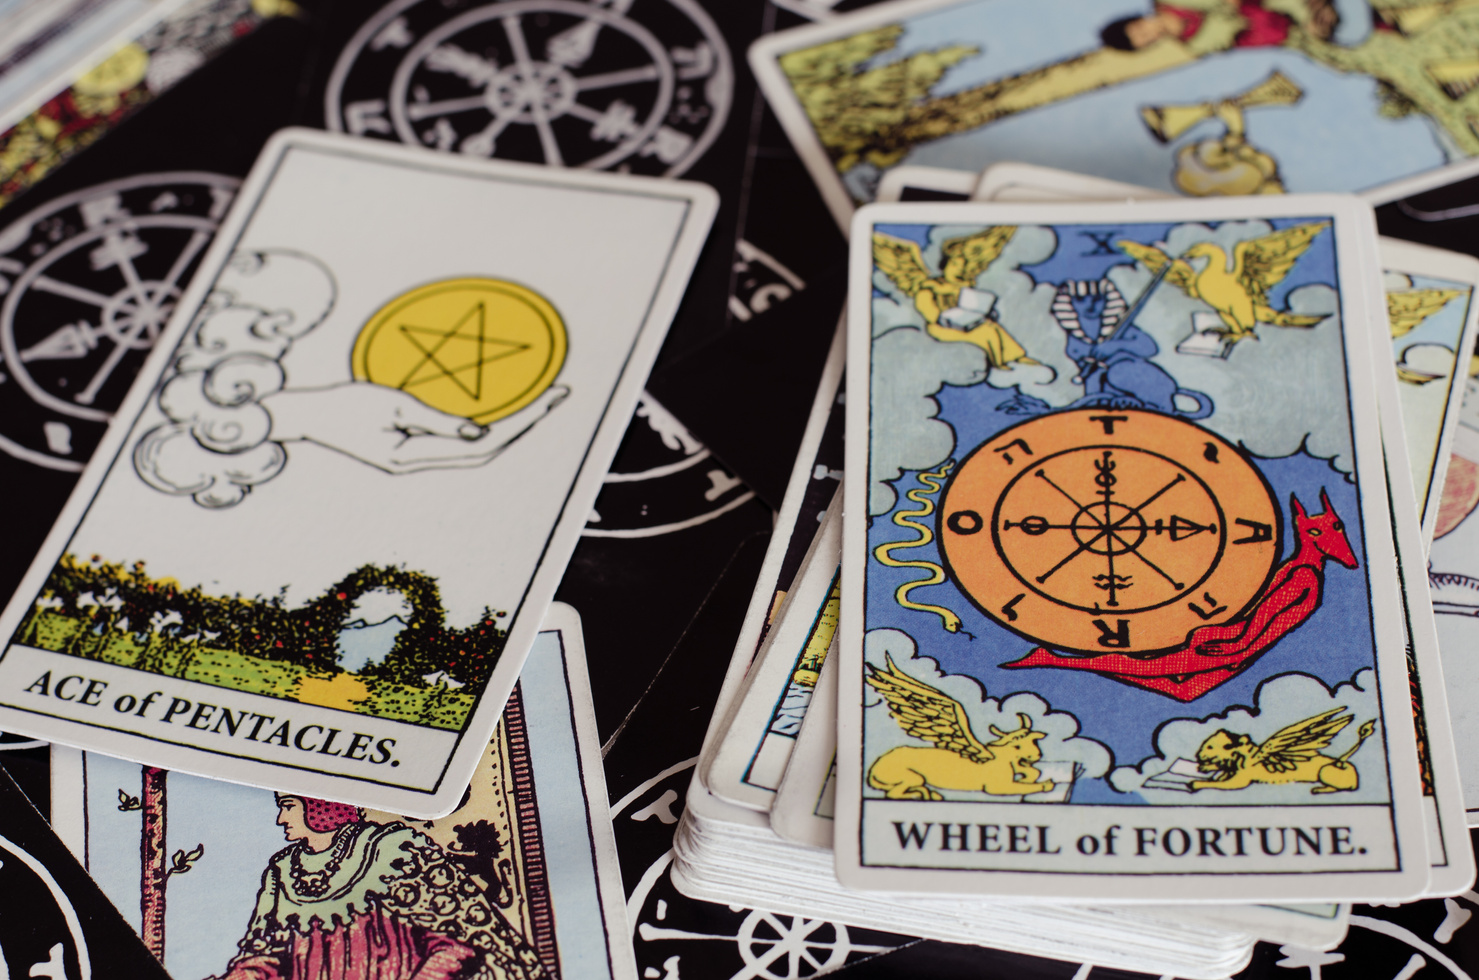 Ace of Pentacles and Wheel of Fortune Card of the Tarot Card.